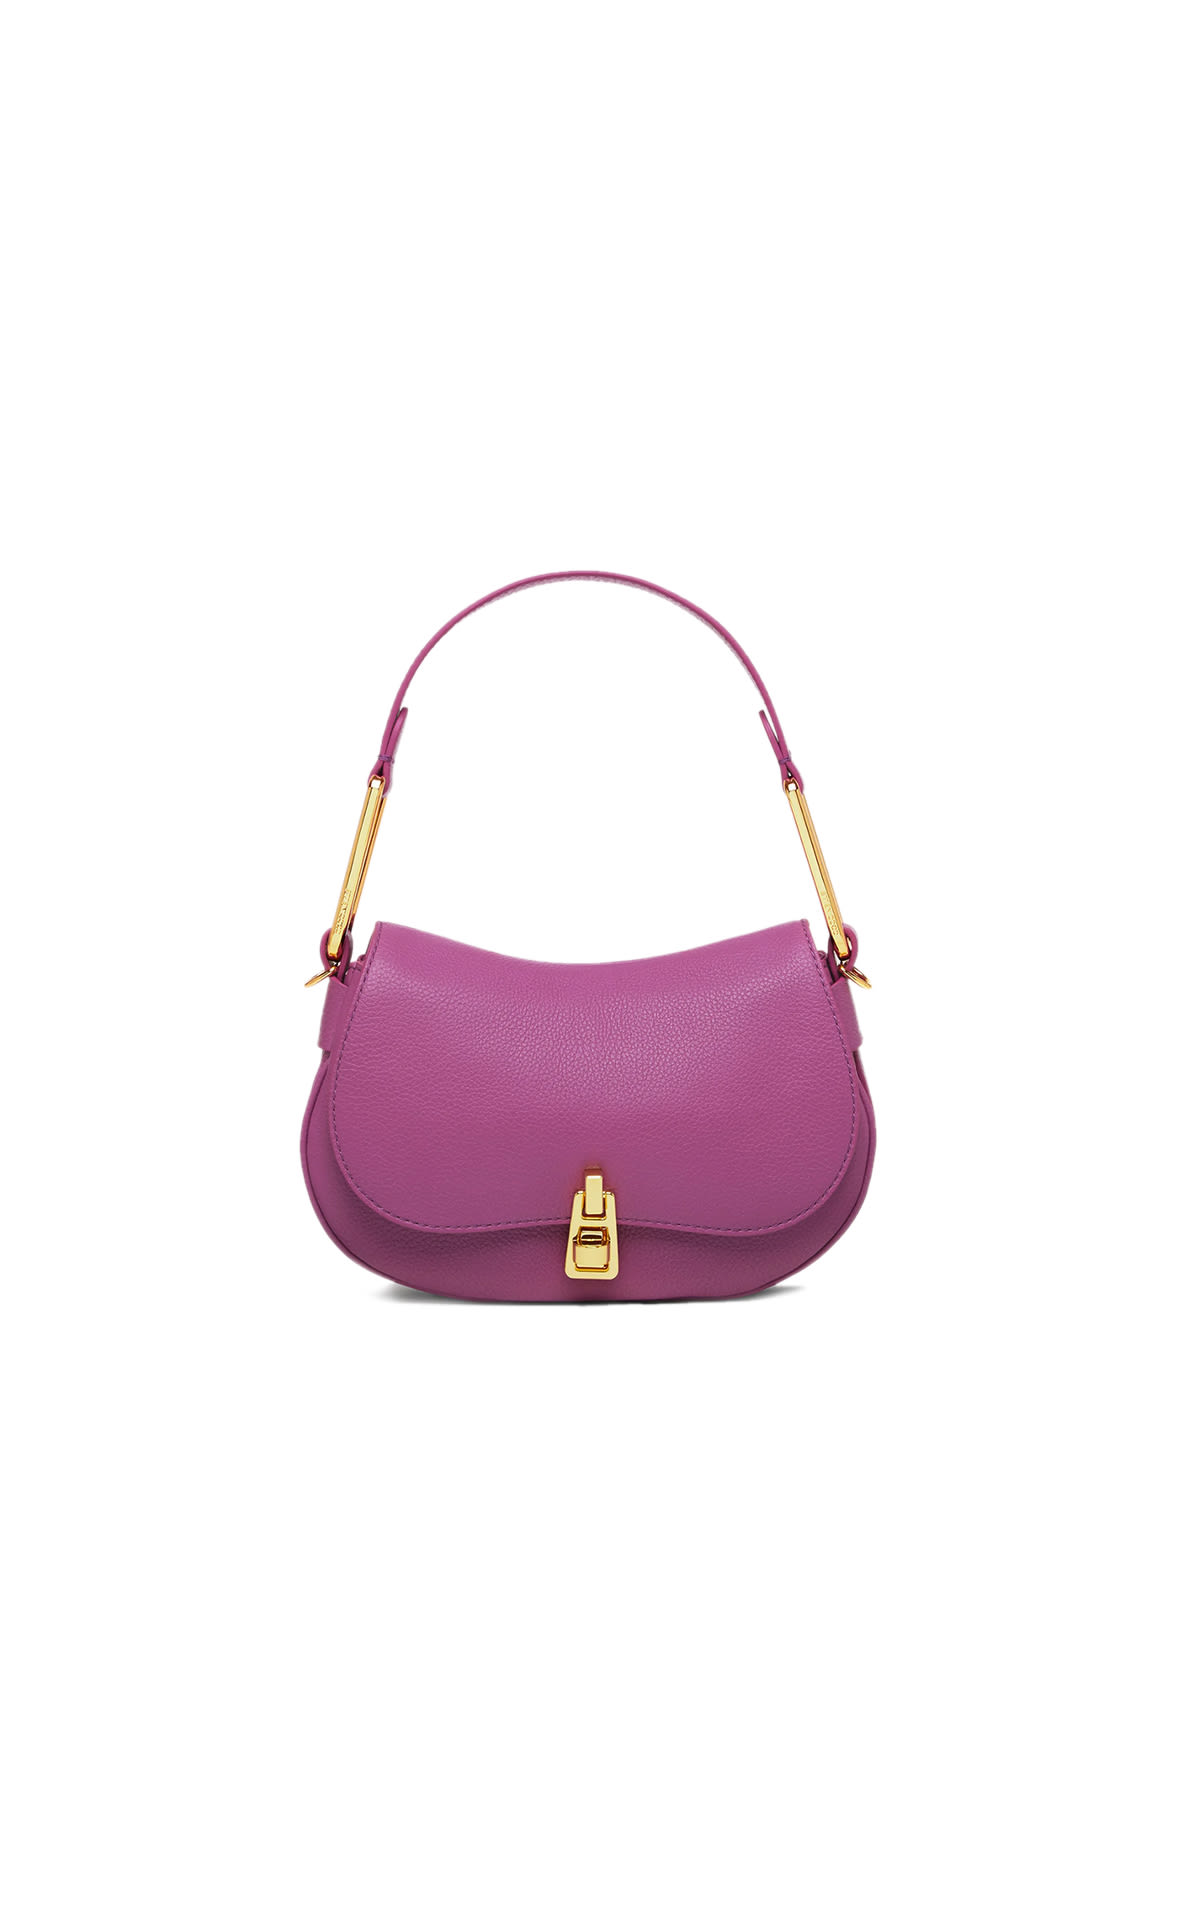 Coccinelle Magento Magie bag